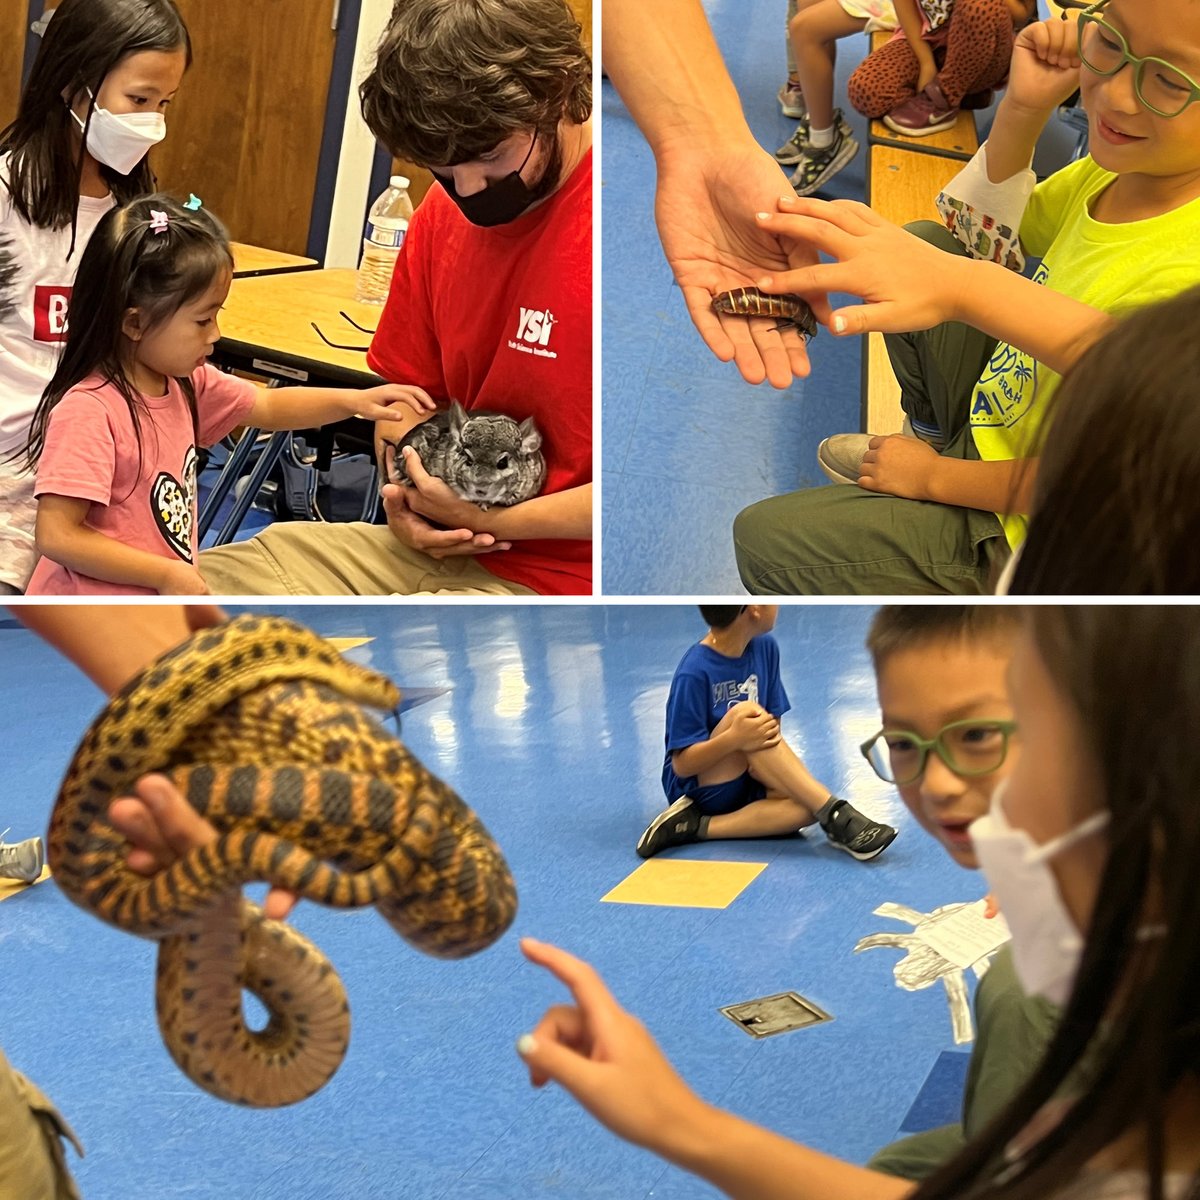 Thanks to the Youth Science Institute (YSI), students at the YMCA After School program at Vinci Park Elementary were able to participate in hands-on environmental education. They loved learning about the environment and being with the different animals YSI brought along!